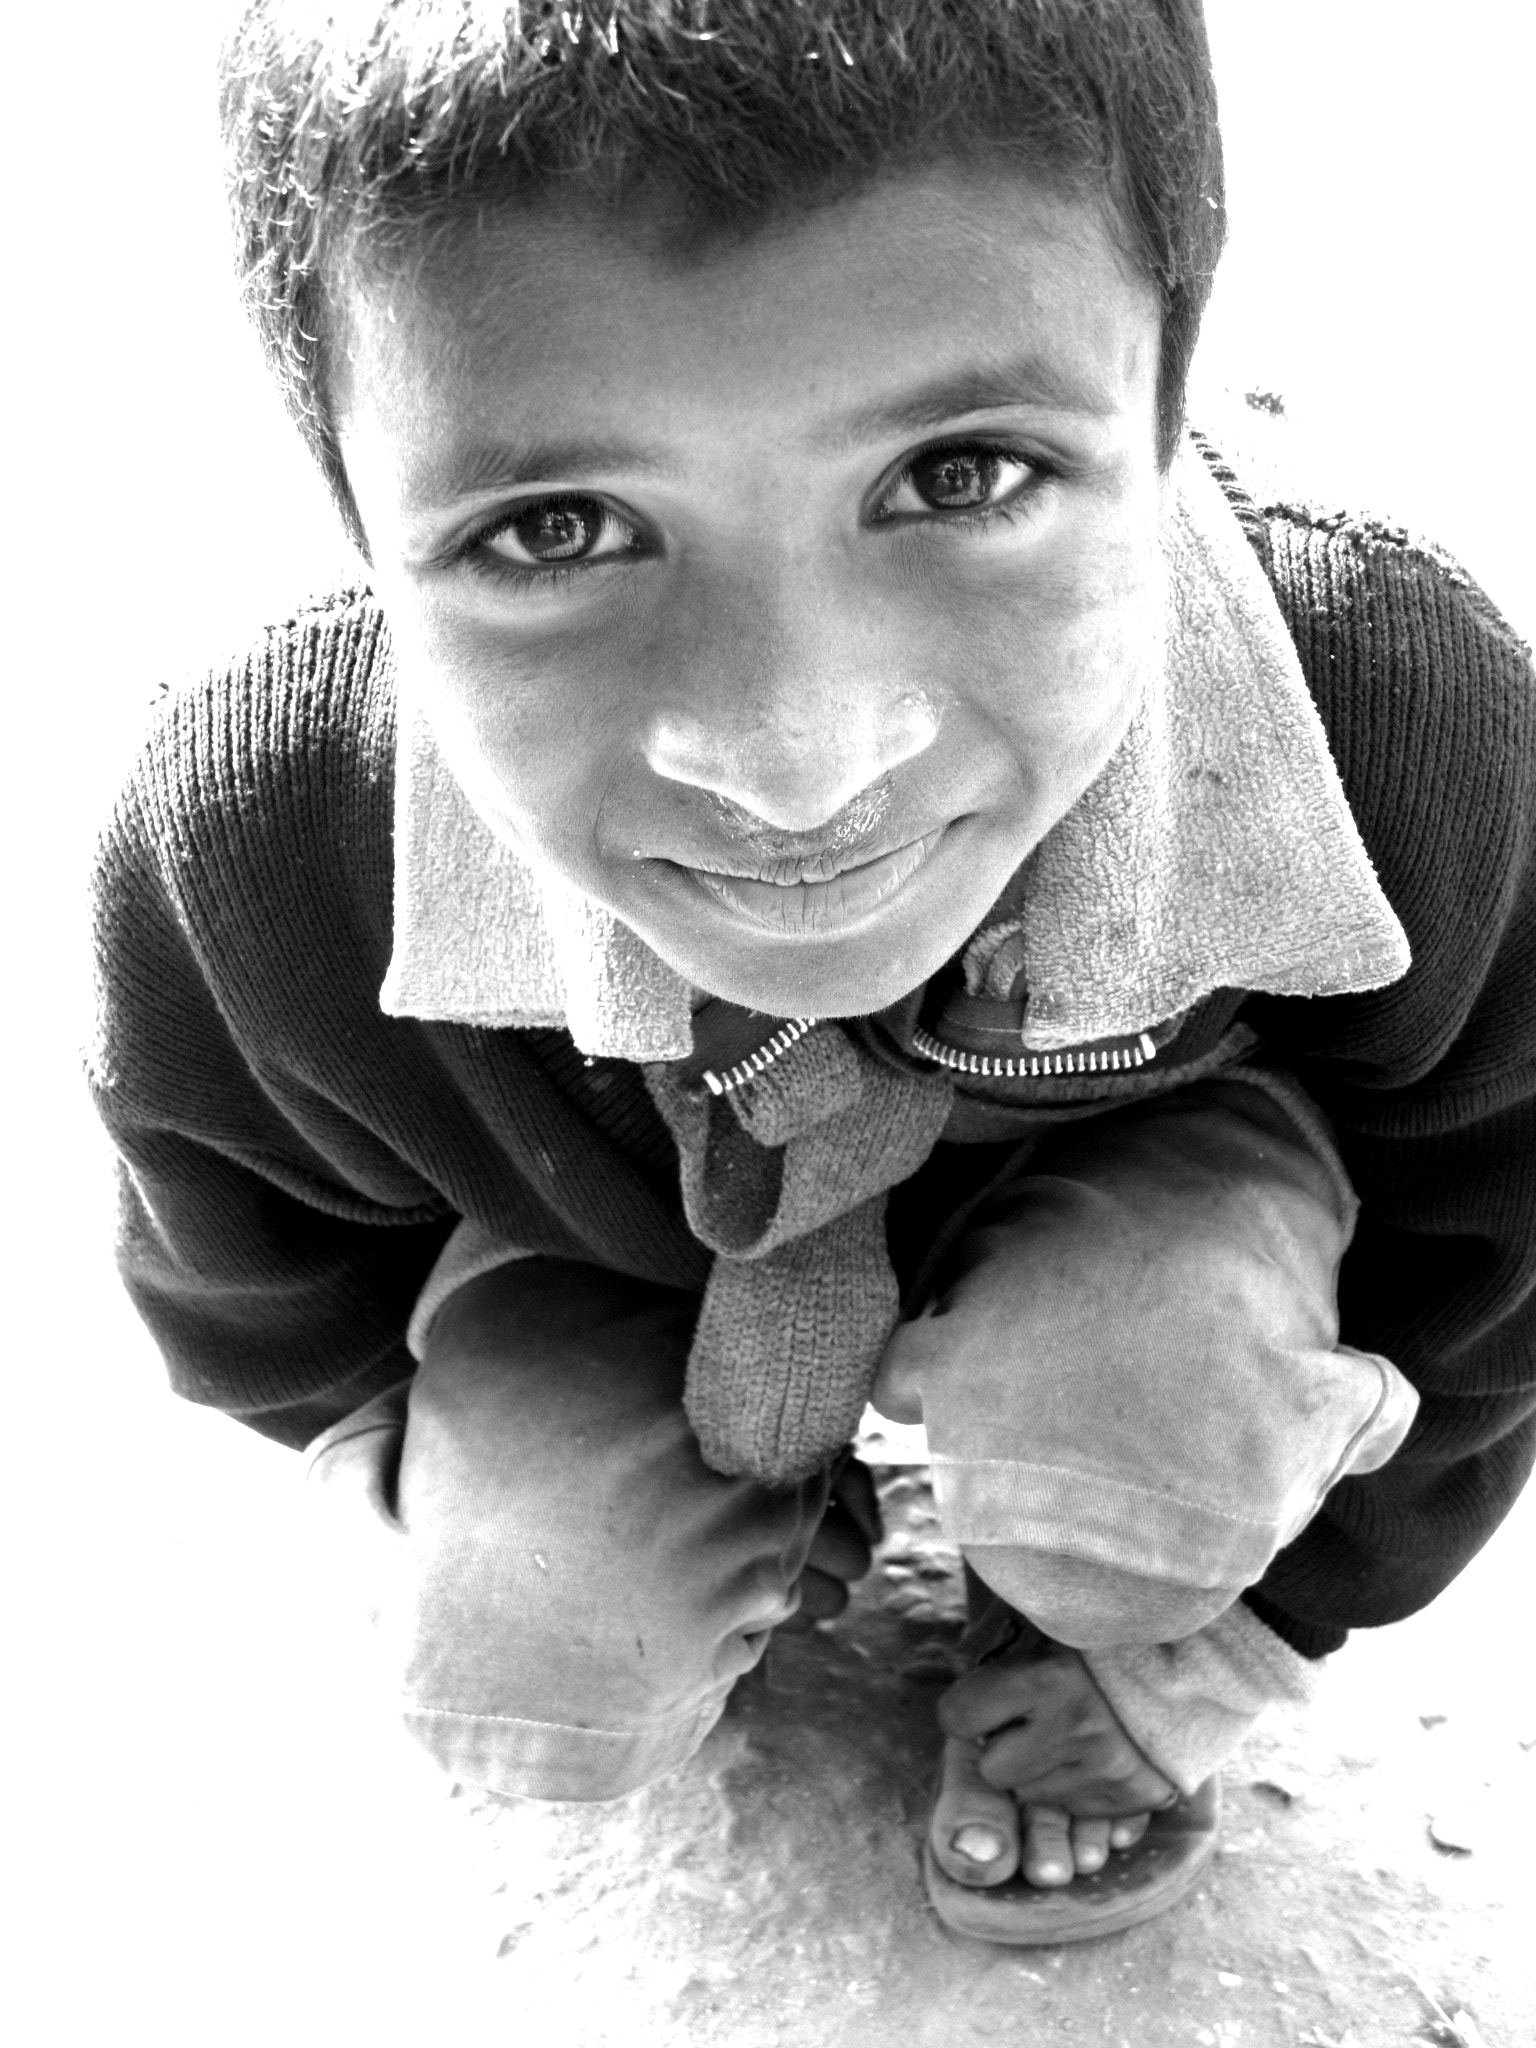 Canon PowerShot SD970 IS (Digital IXUS 990 IS / IXY Digital 830 IS) sample photo. Boy in southern nepal photography